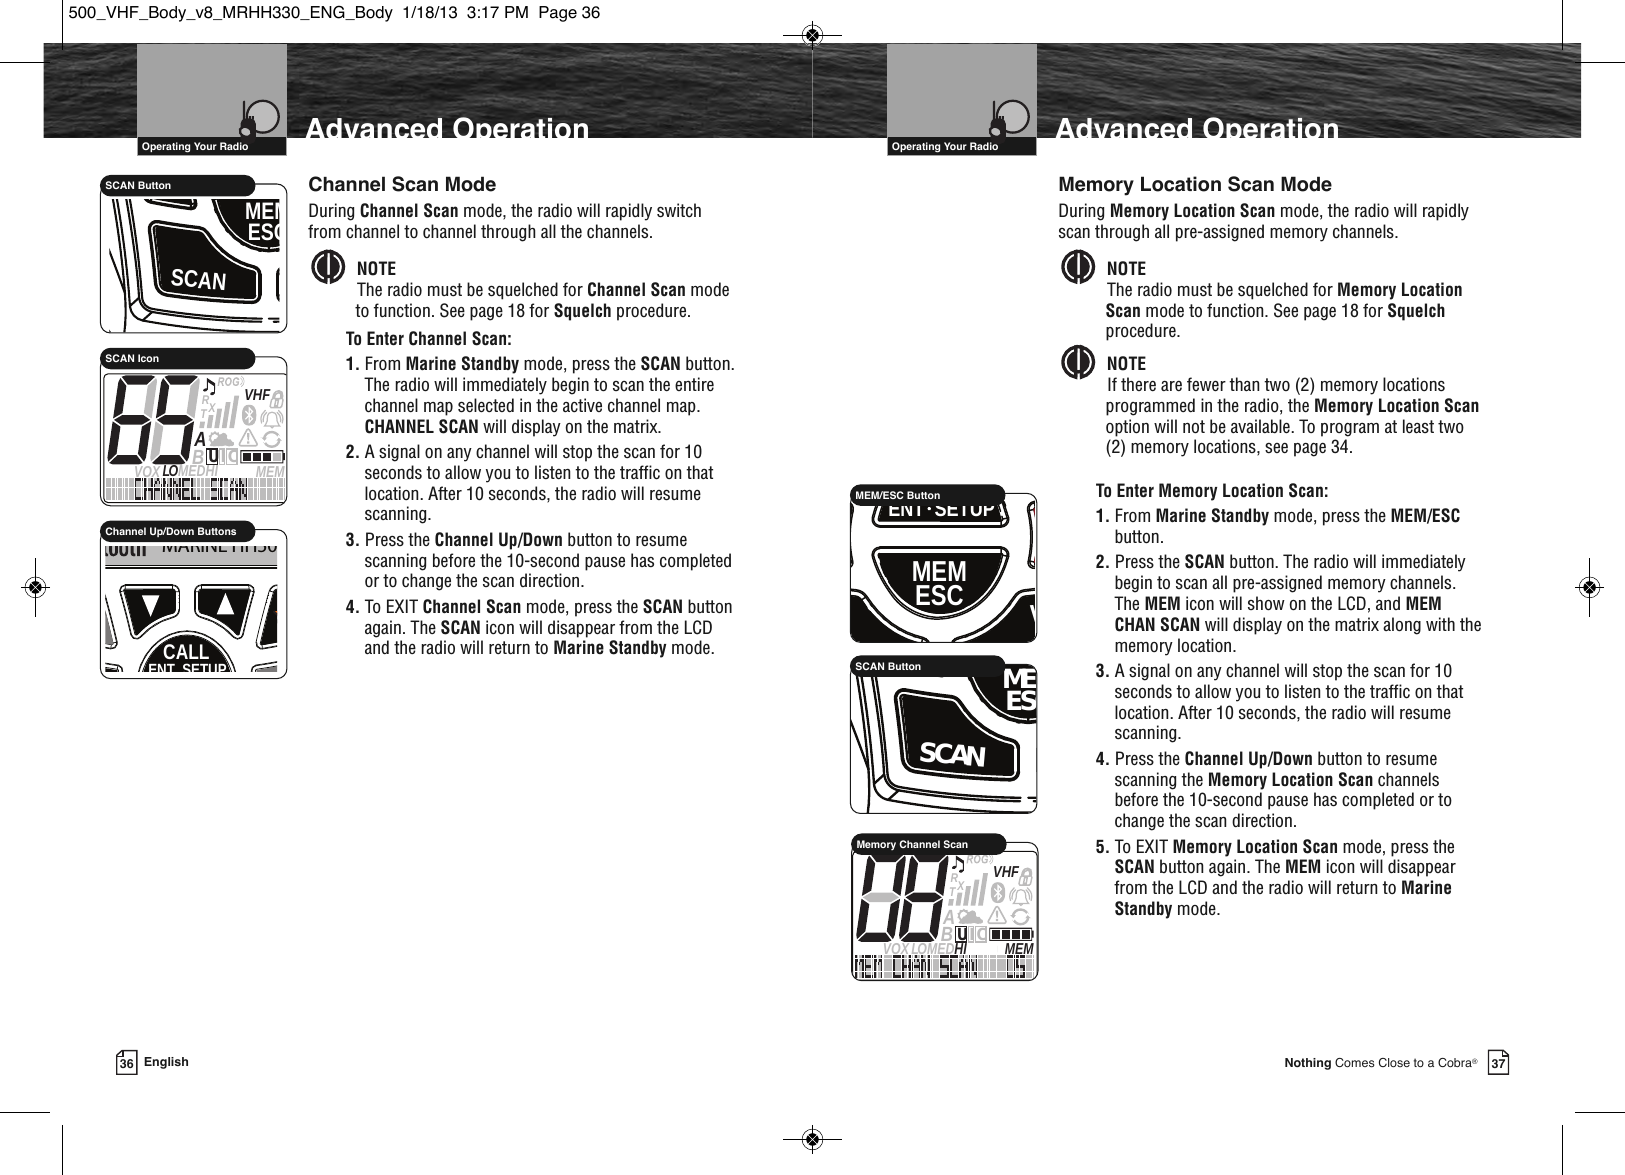 Page 21 of Cobra Electronics MRHH500 BT ACCESSORY IN MARINE RADIO User Manual MRHH330 ENG Body